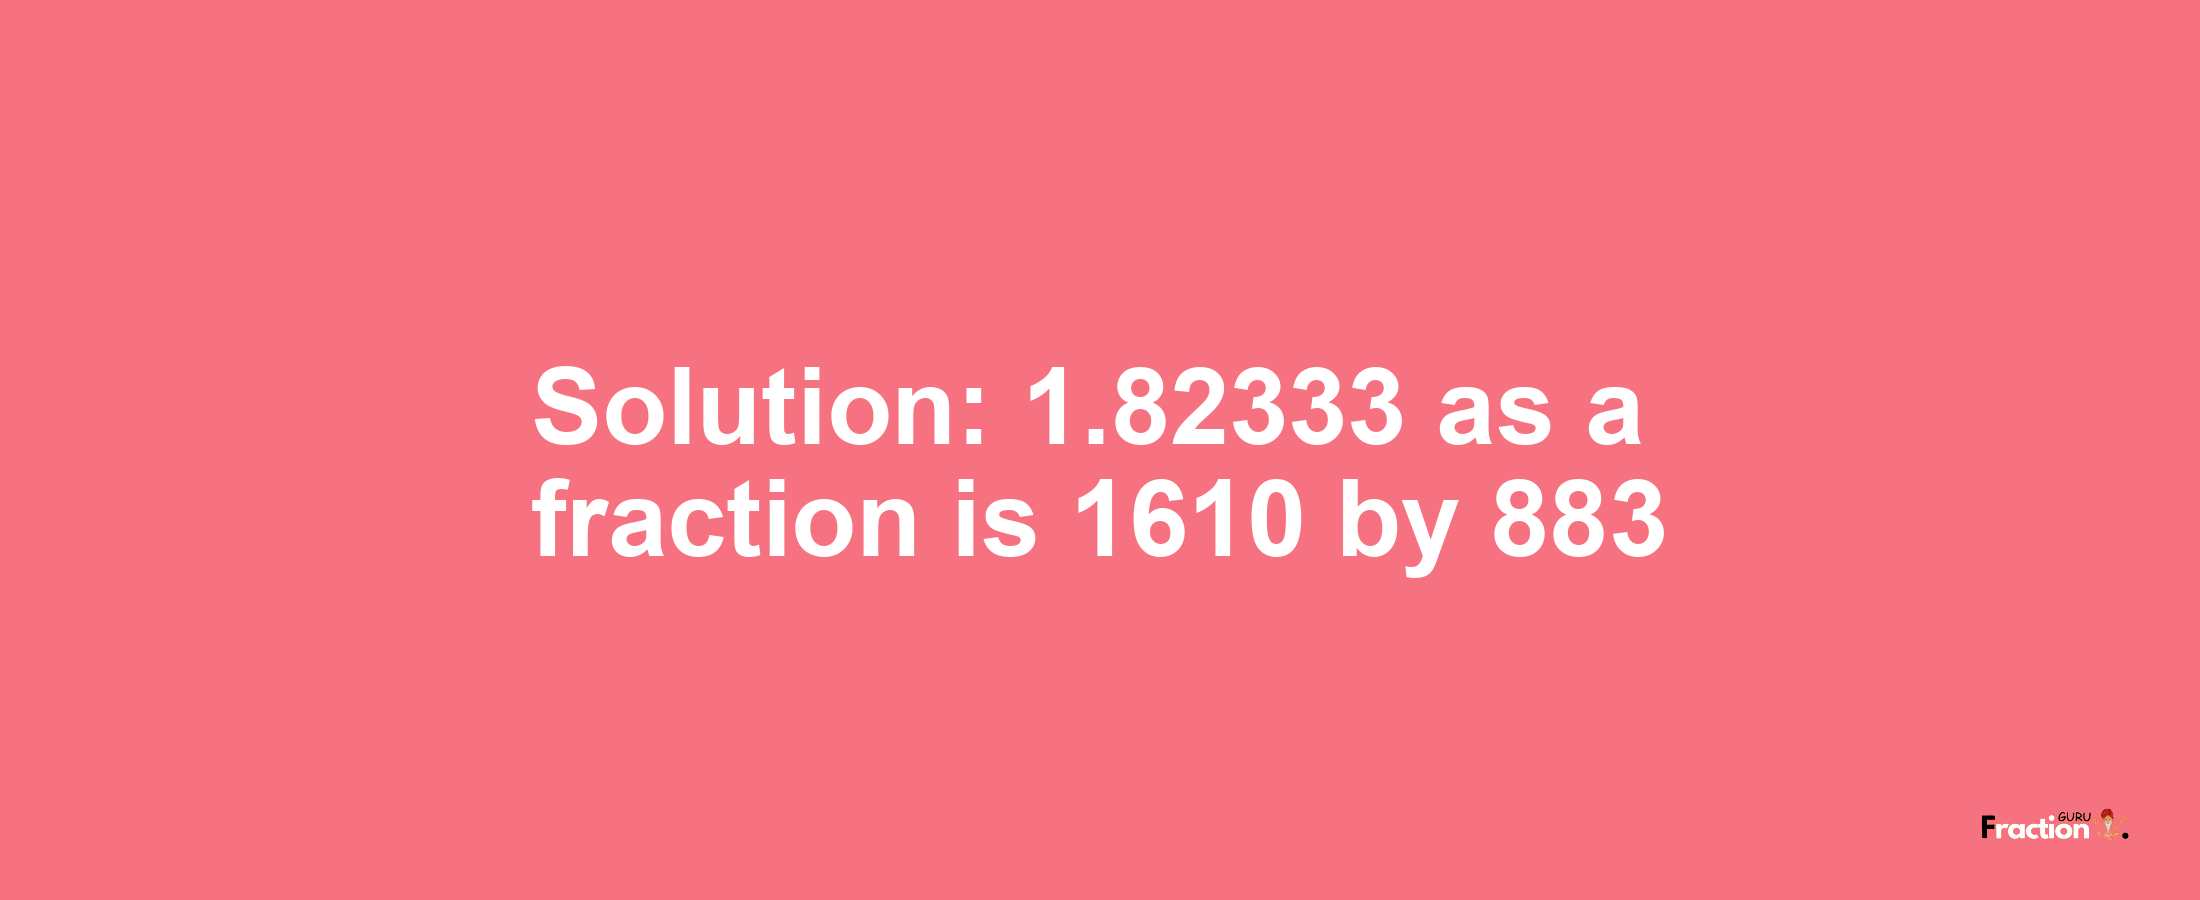 Solution:1.82333 as a fraction is 1610/883